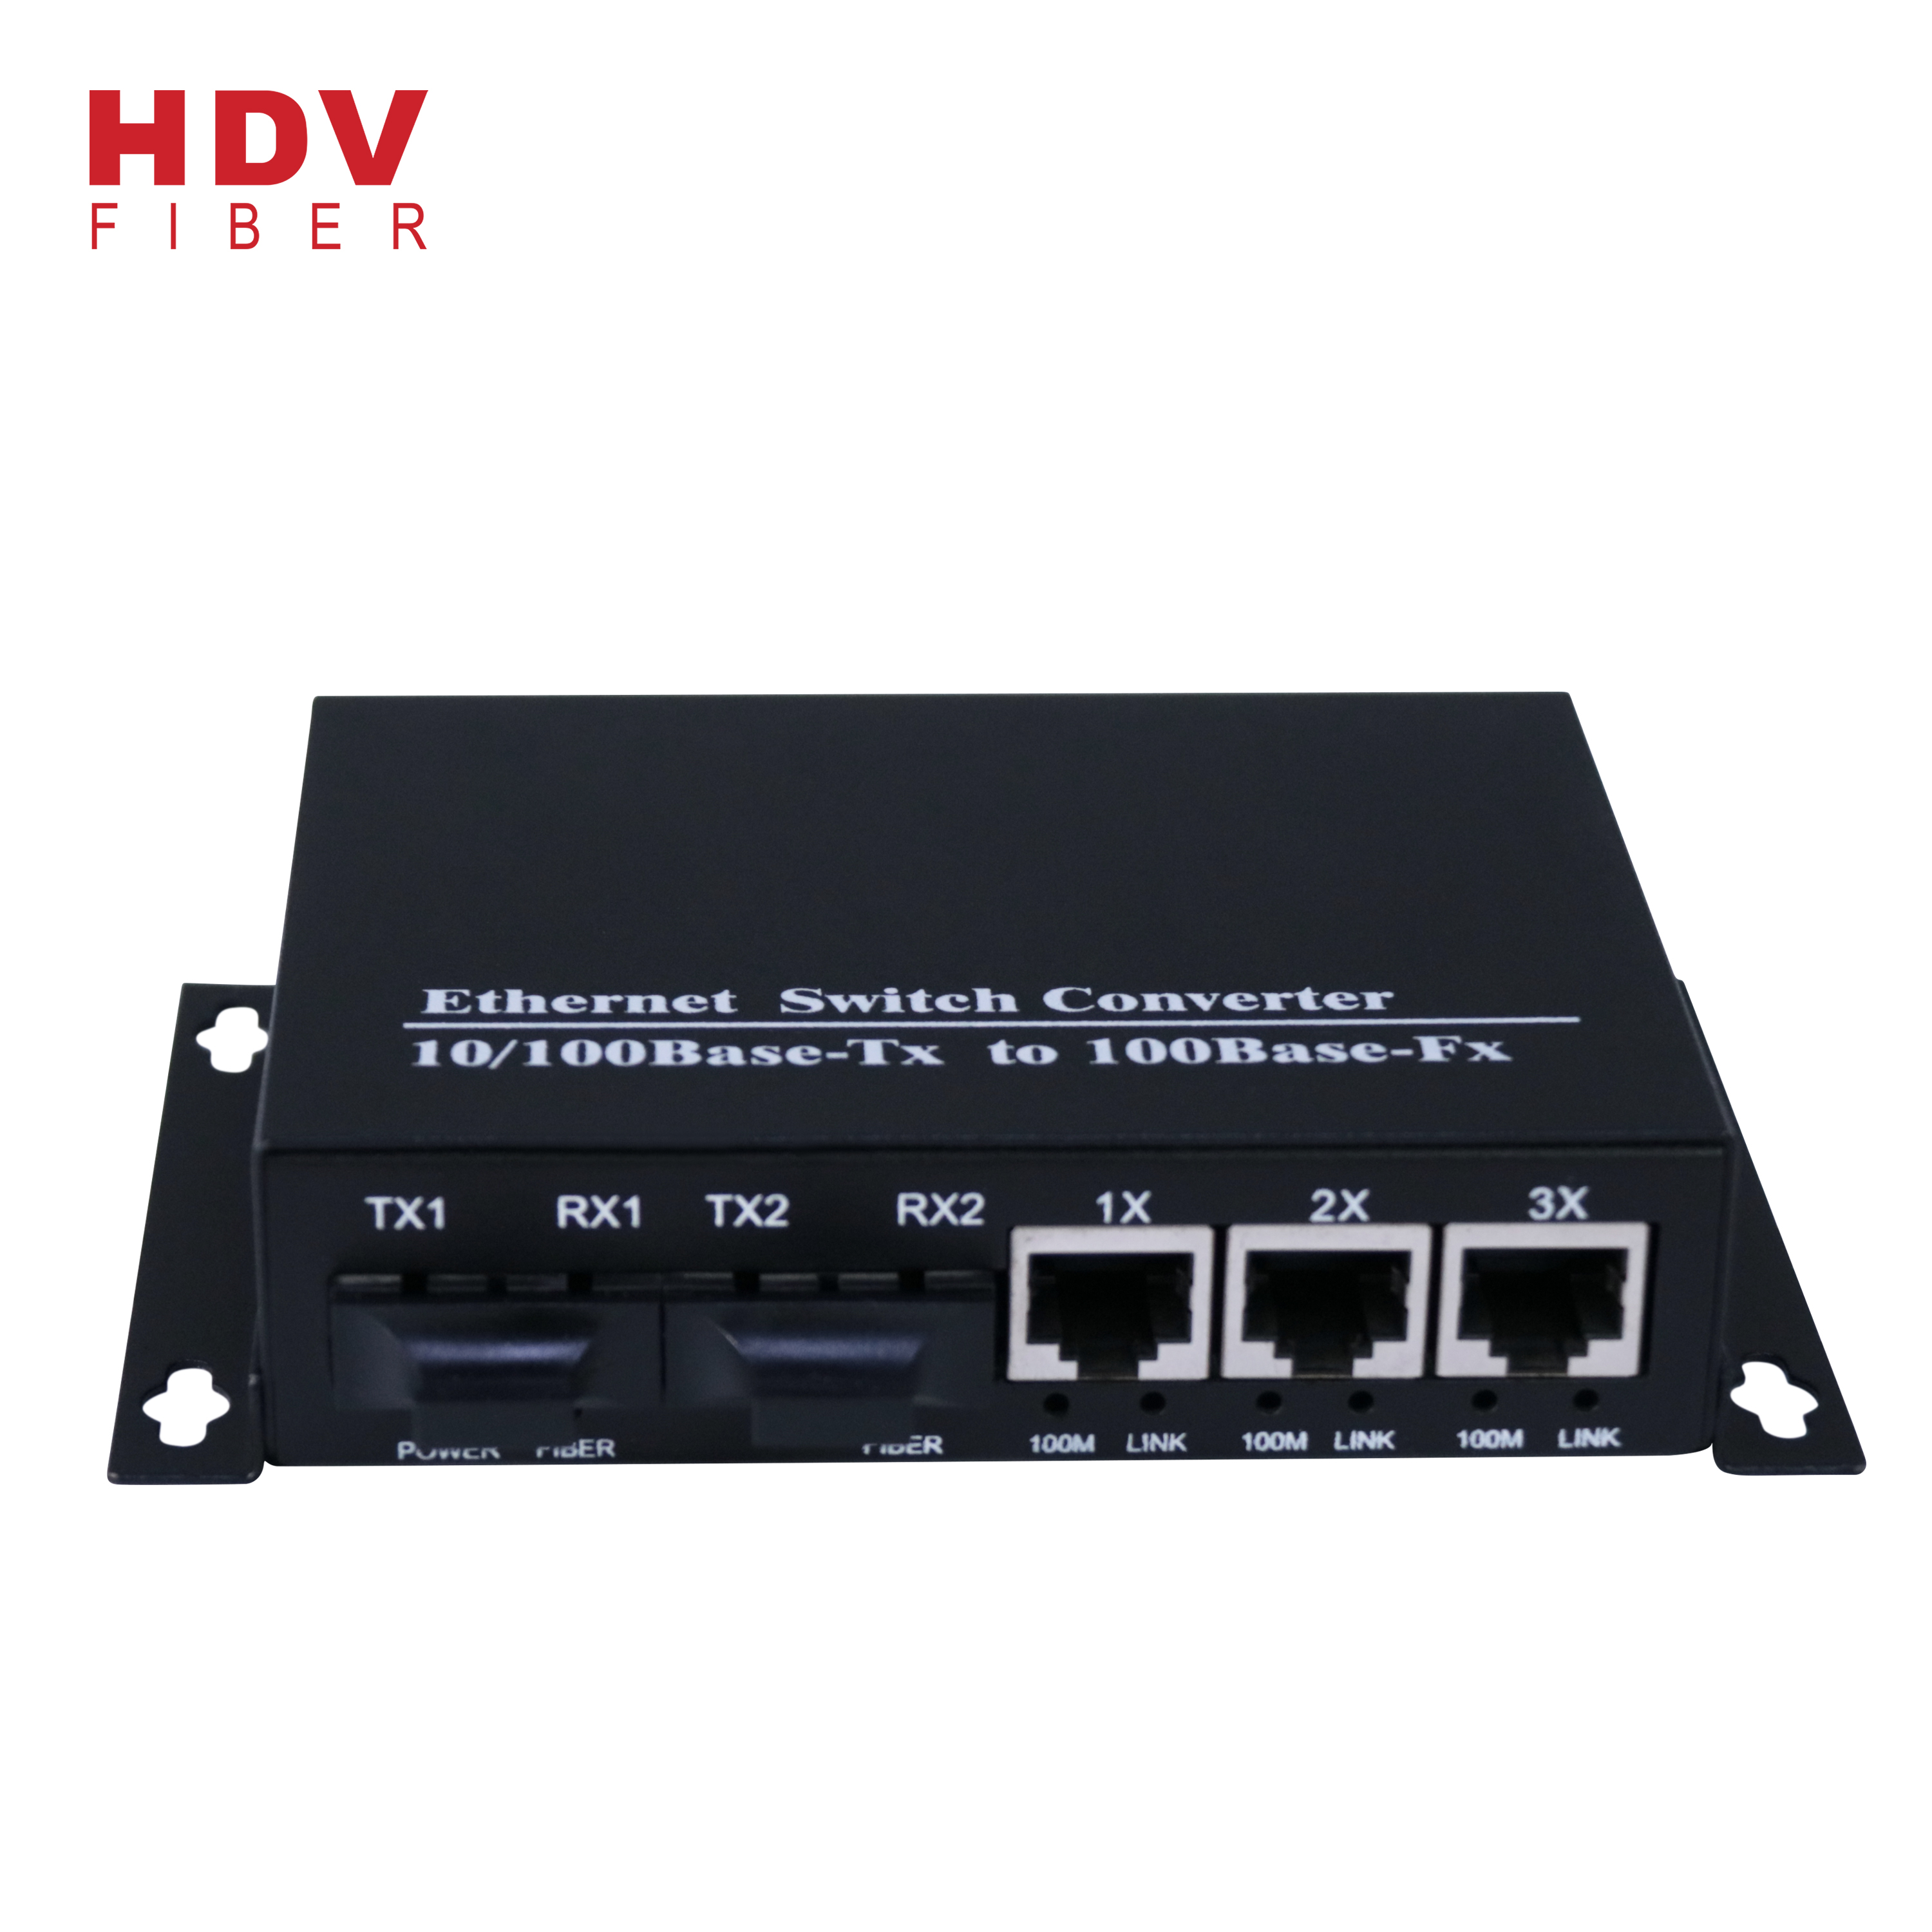 2019 High quality 4 Port Managed Industrial Switch - New Model Dual Fiber Compatible Huawei Industrial 3 Port Ethernet Switch – HDV